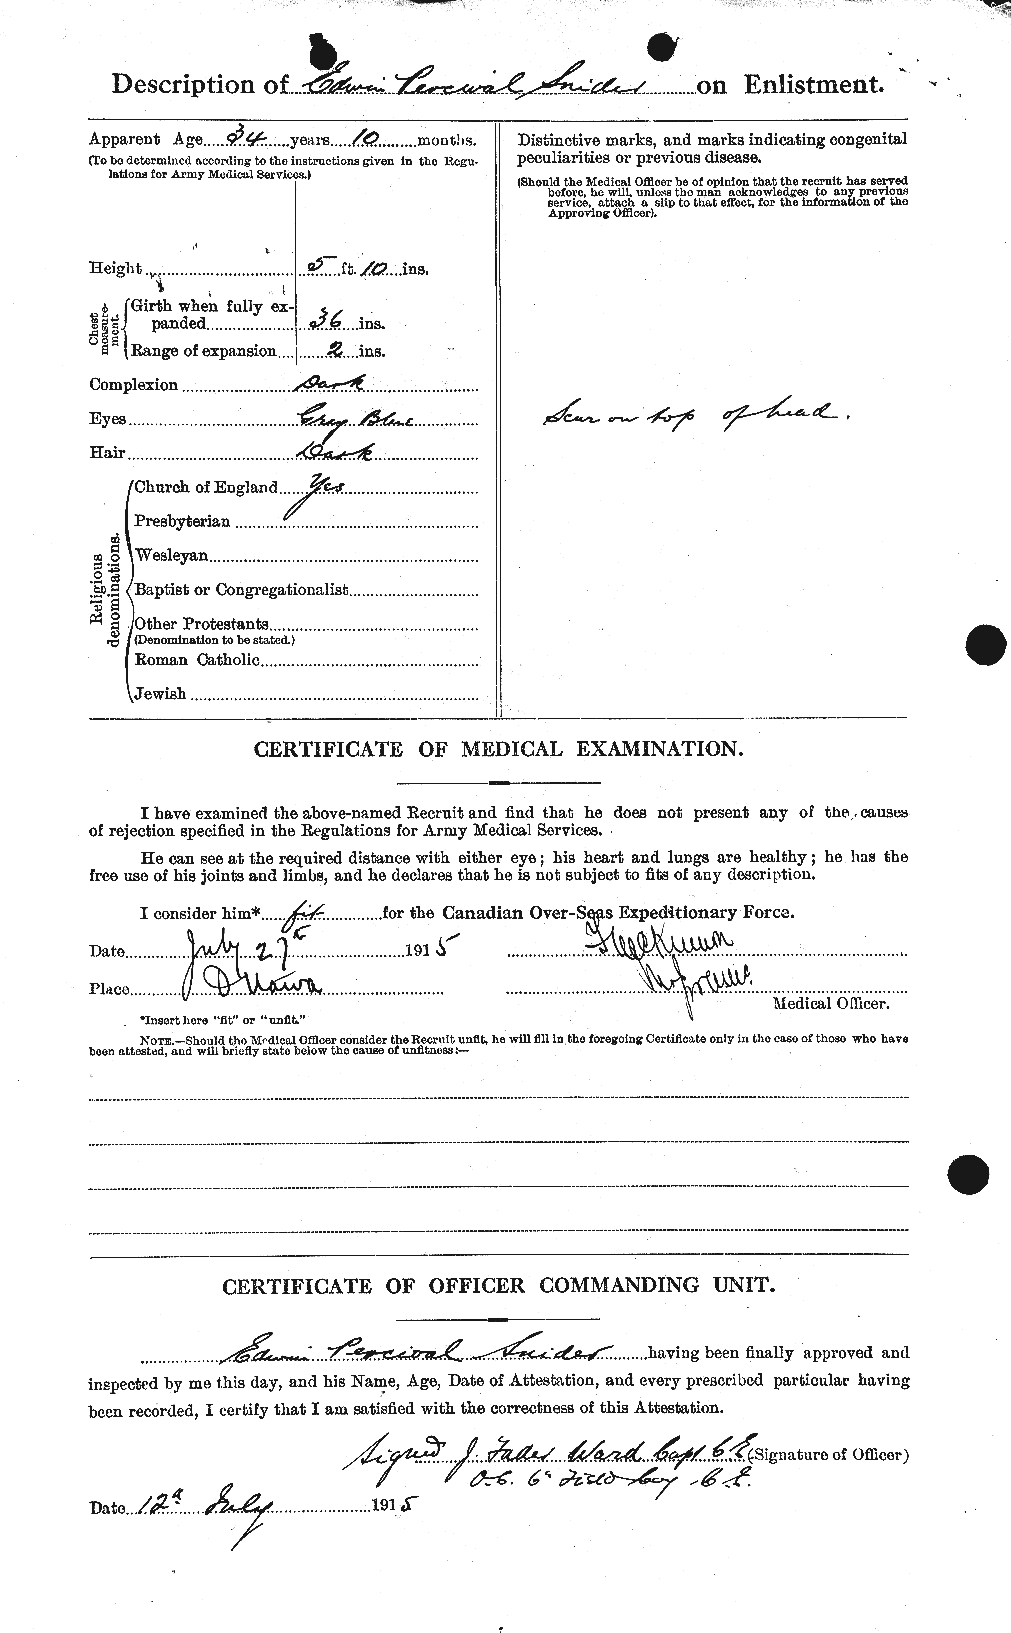 Personnel Records of the First World War - CEF 110048b